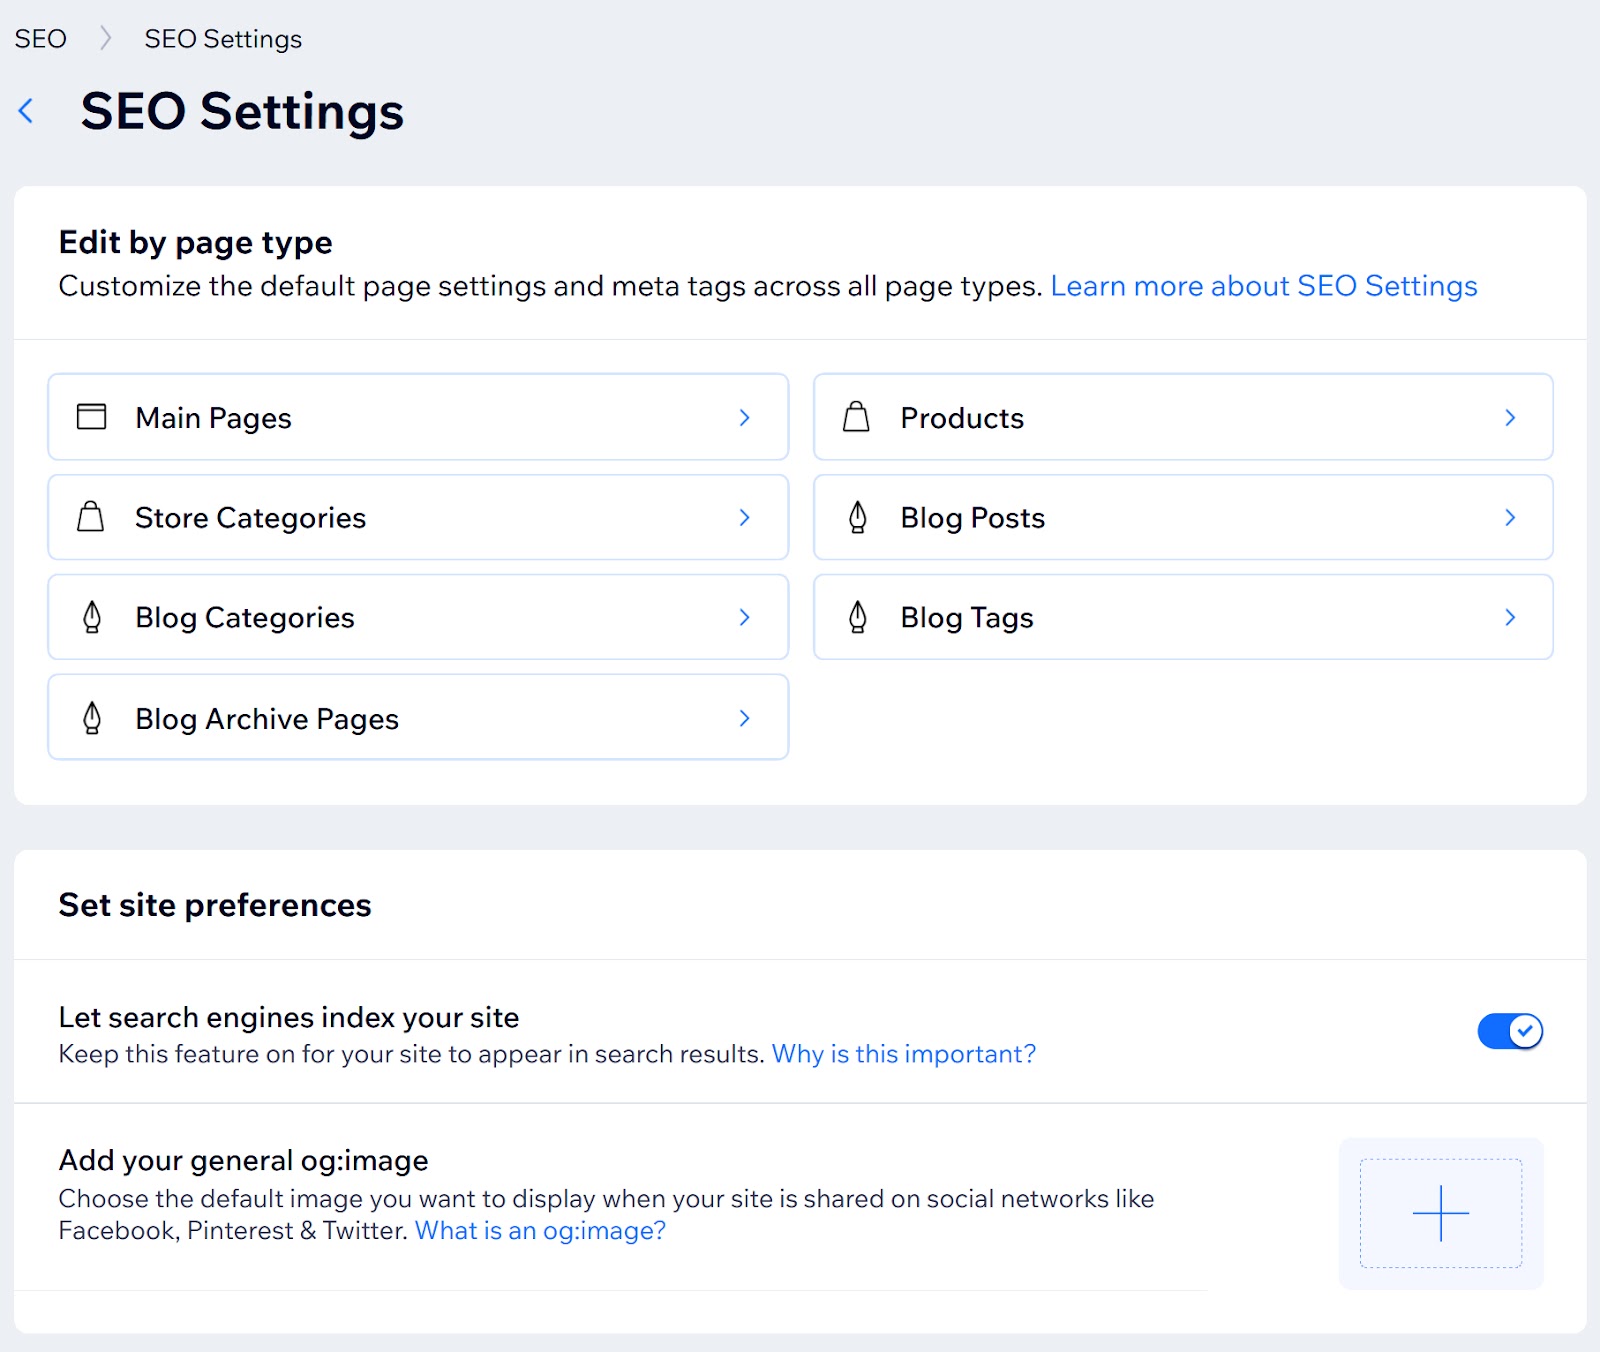 Wix’s SEO Settings page